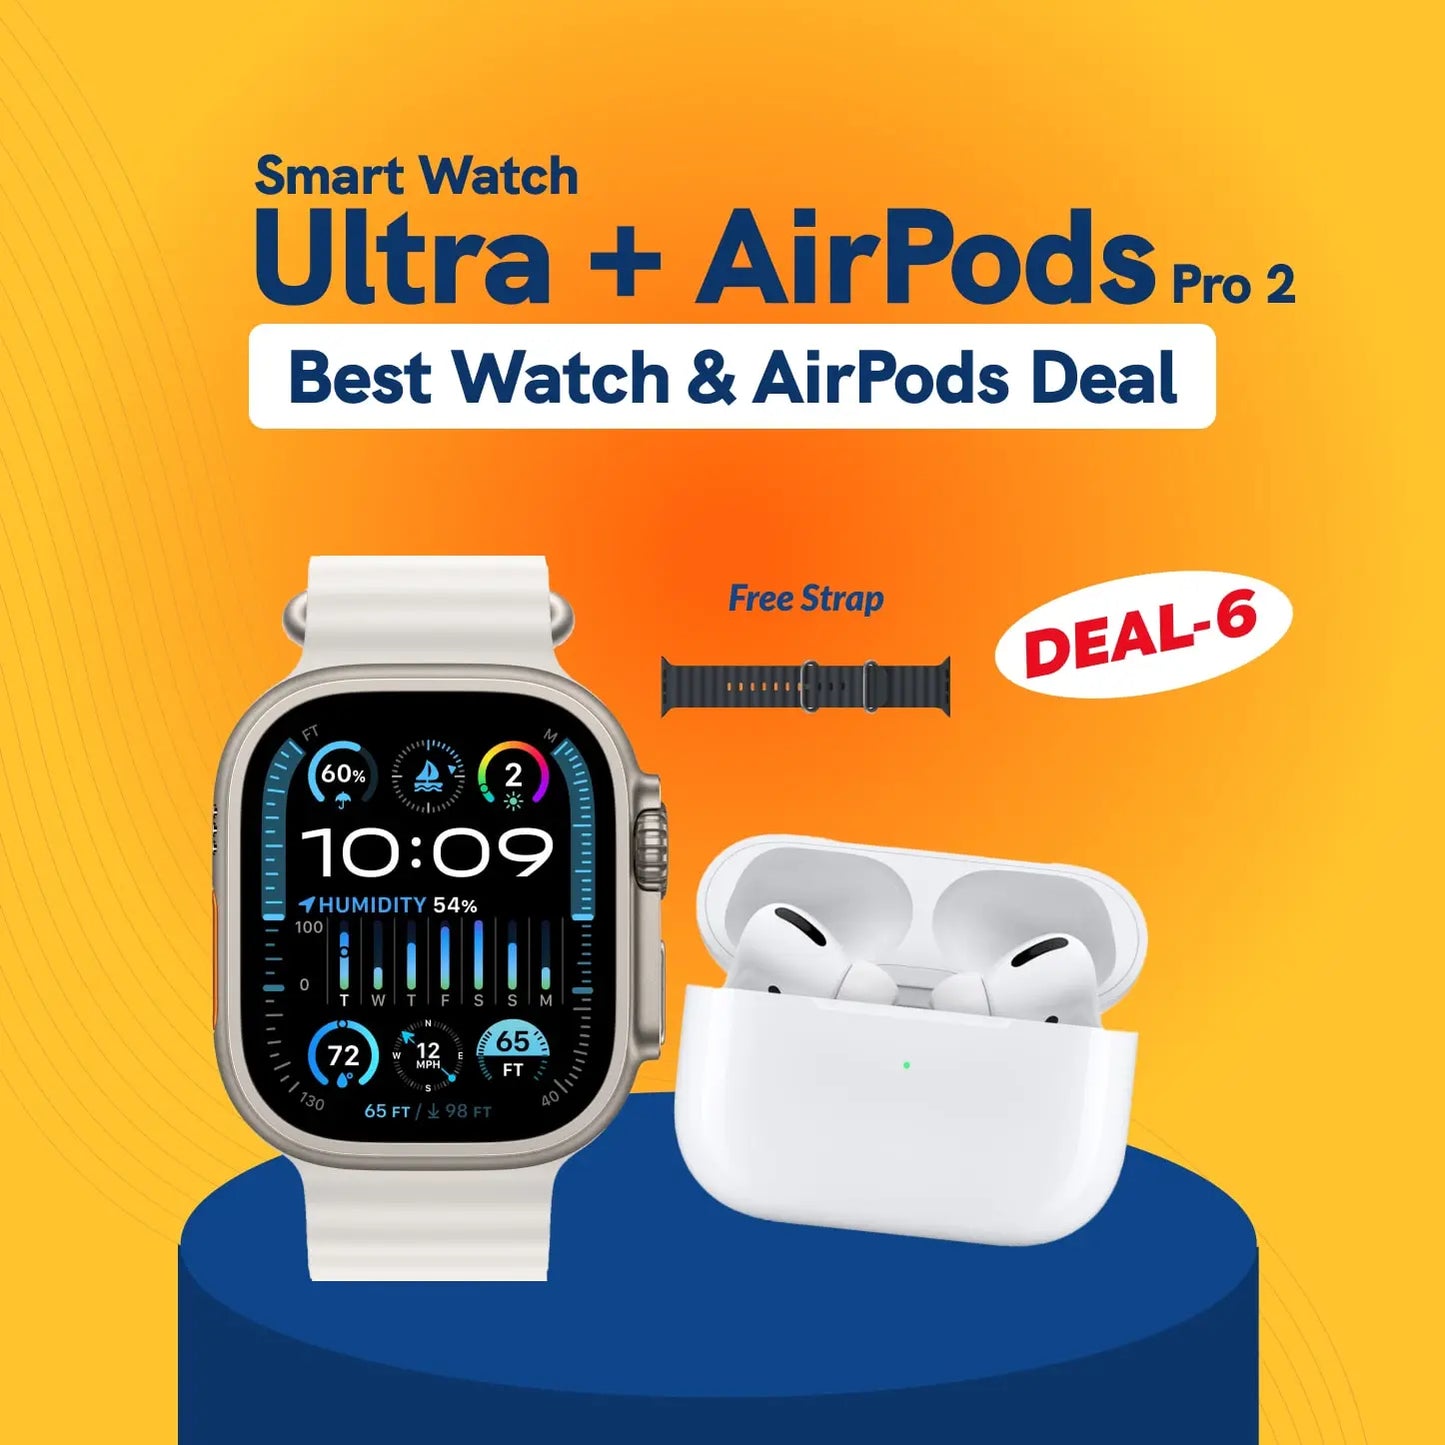 T10 Ultra 2 + AirPods Pro 2 Latest Smart Watch Deal